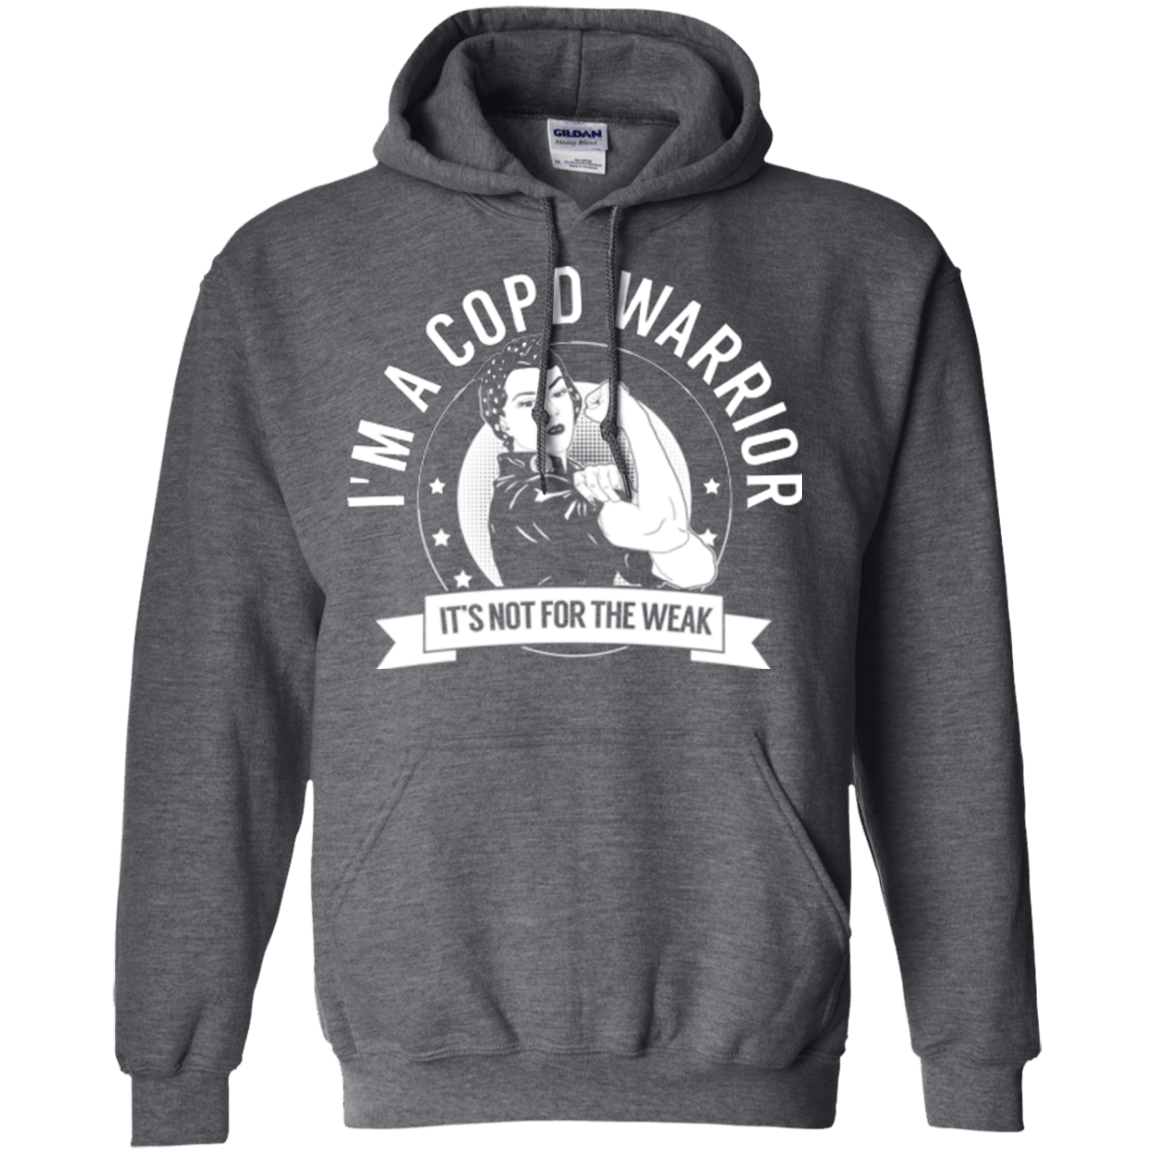 Chronic Obstructive Pulmonary Disease - COPD Warrior Not For The Weak Pullover Hoodie 8 oz. - The Unchargeables